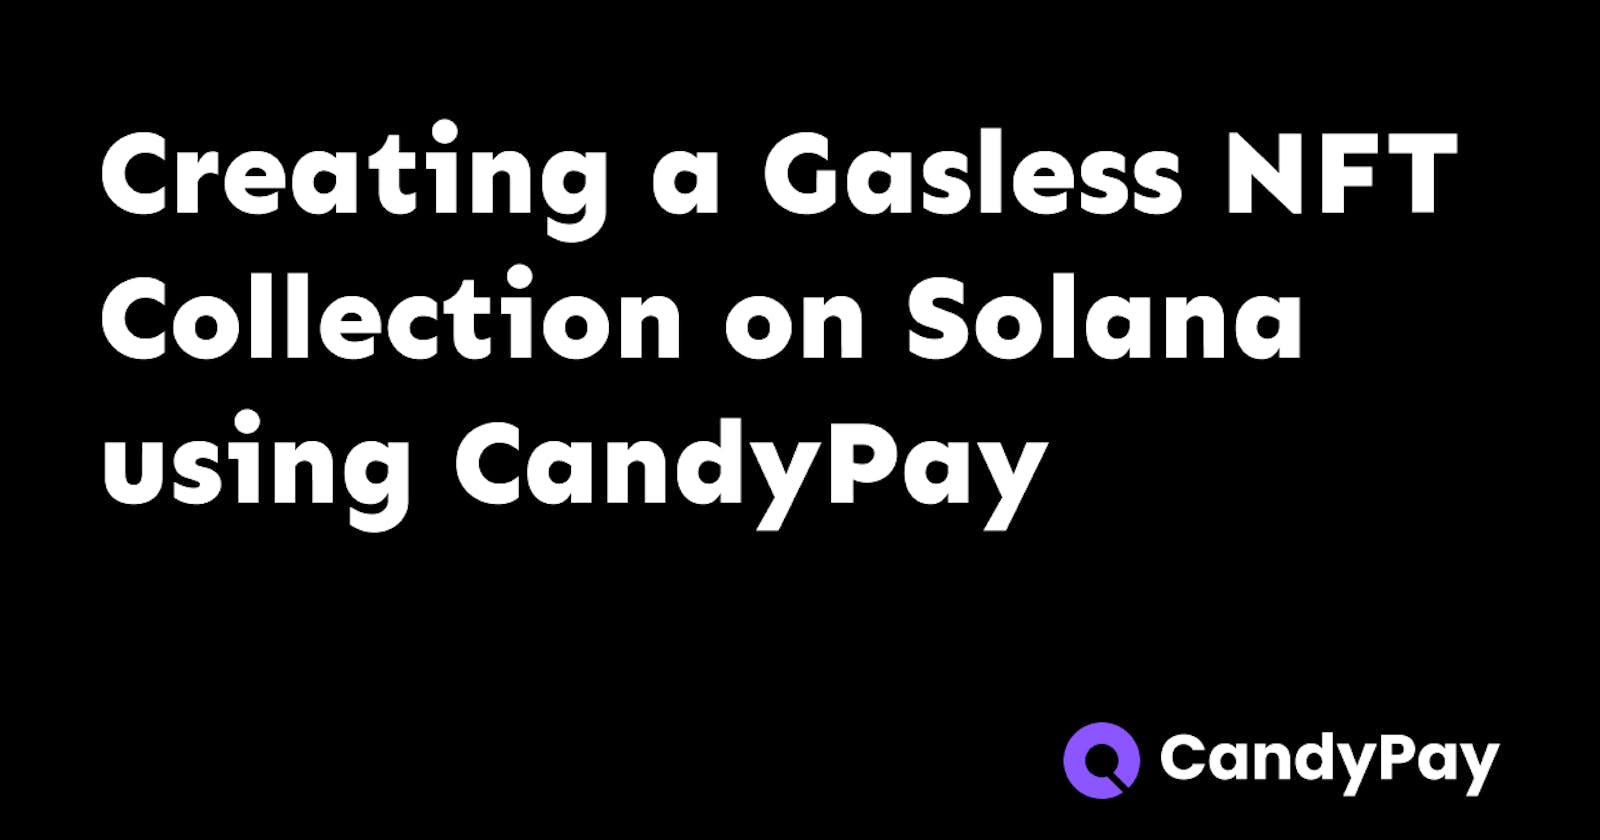 How to quickly create a Gasless NFT Collection on Solana with CandyPay